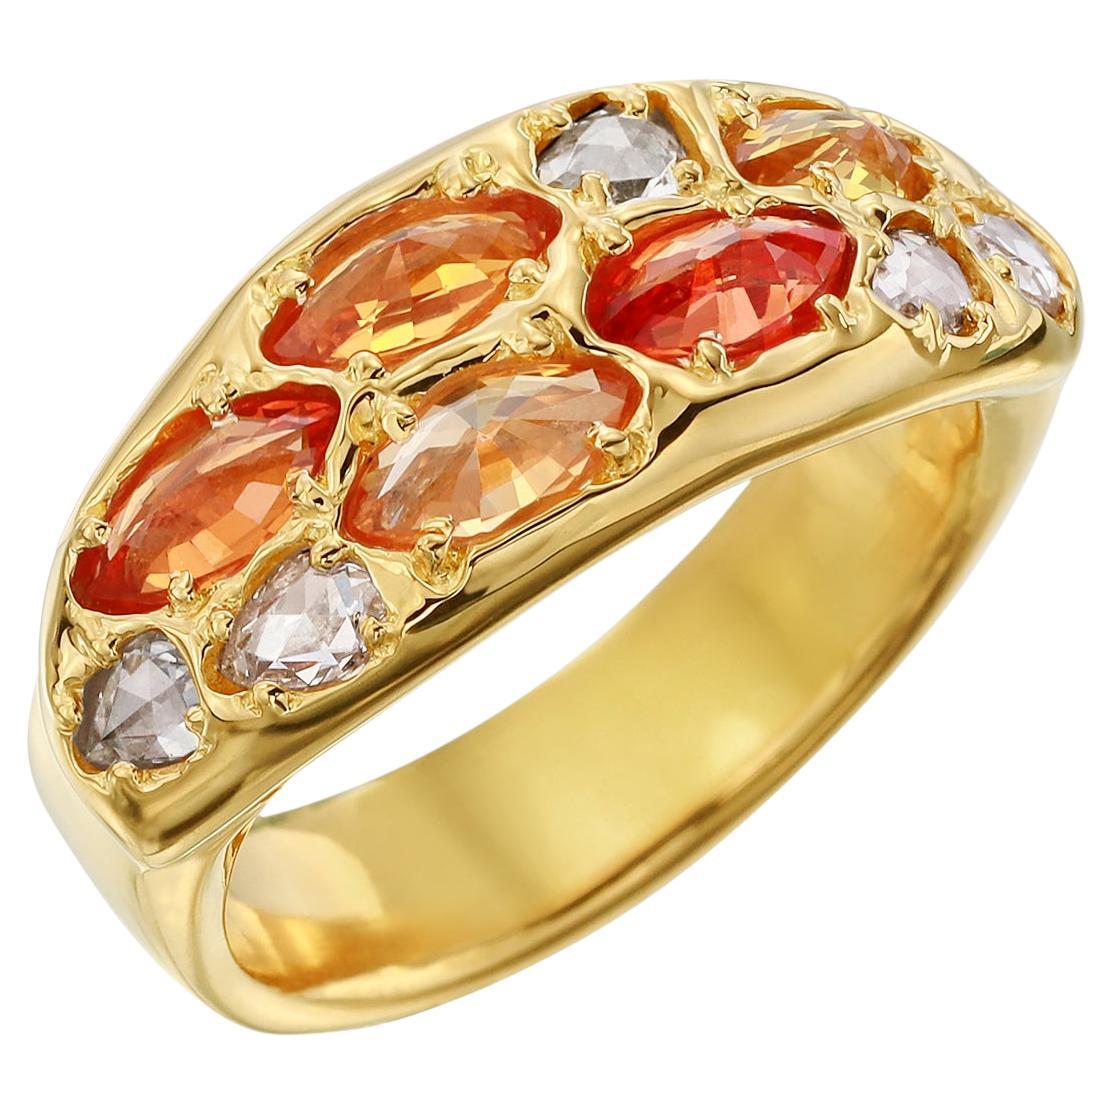 20kt Yellow Gold Ring with Orange and Yellow Fancy Sapphires and White Diamonds